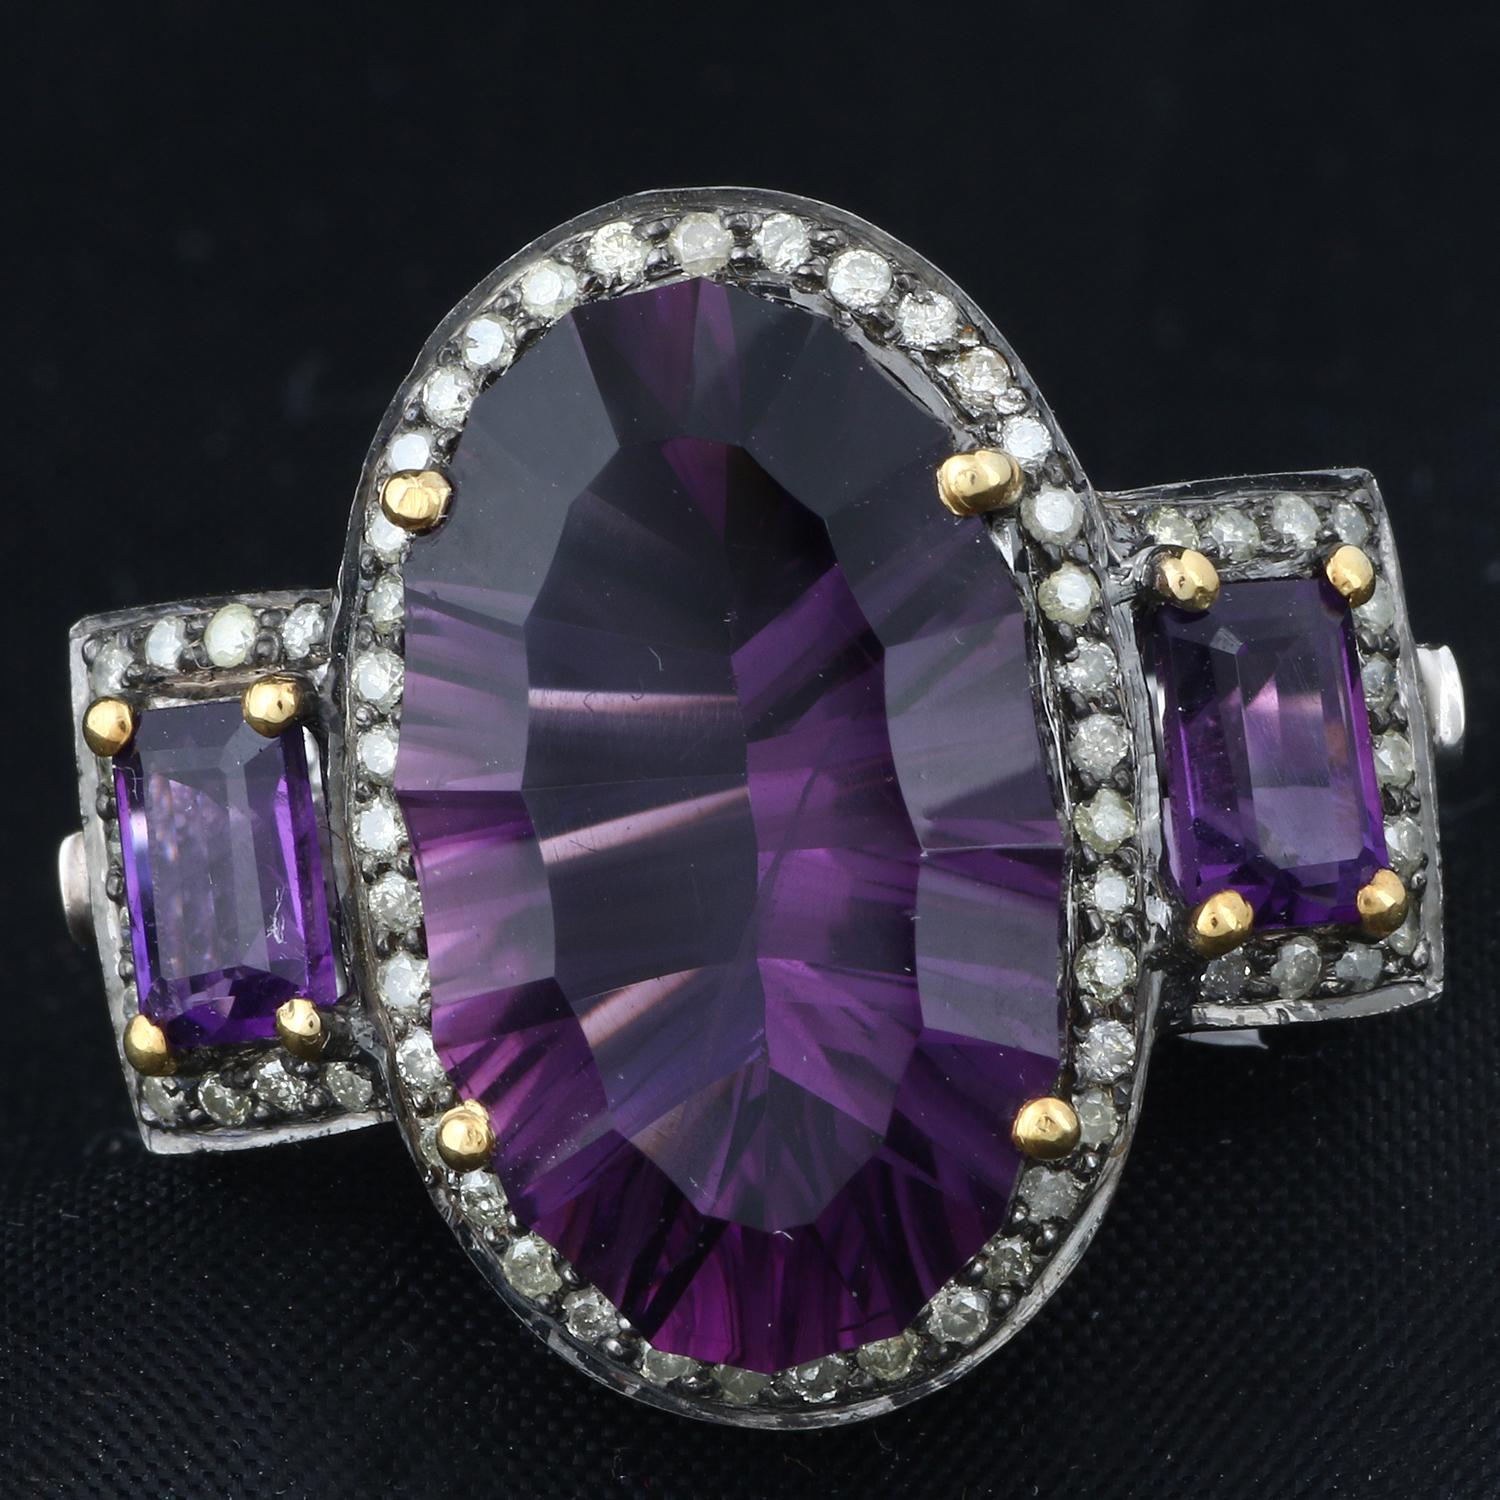 Item details:-

✦ SKU:- ESRG00155

✦ Material :- Silver
✦ Gemstone Specification:-
✧ Diamond
✧ Amethyst

✦ Approx. Diamond Weight : 0.45
✦ Approx. Silver Weight : 5.88
✦ Approx. Gross Weight : 8.12

Ring Size (US): 8

You will Get the same Product